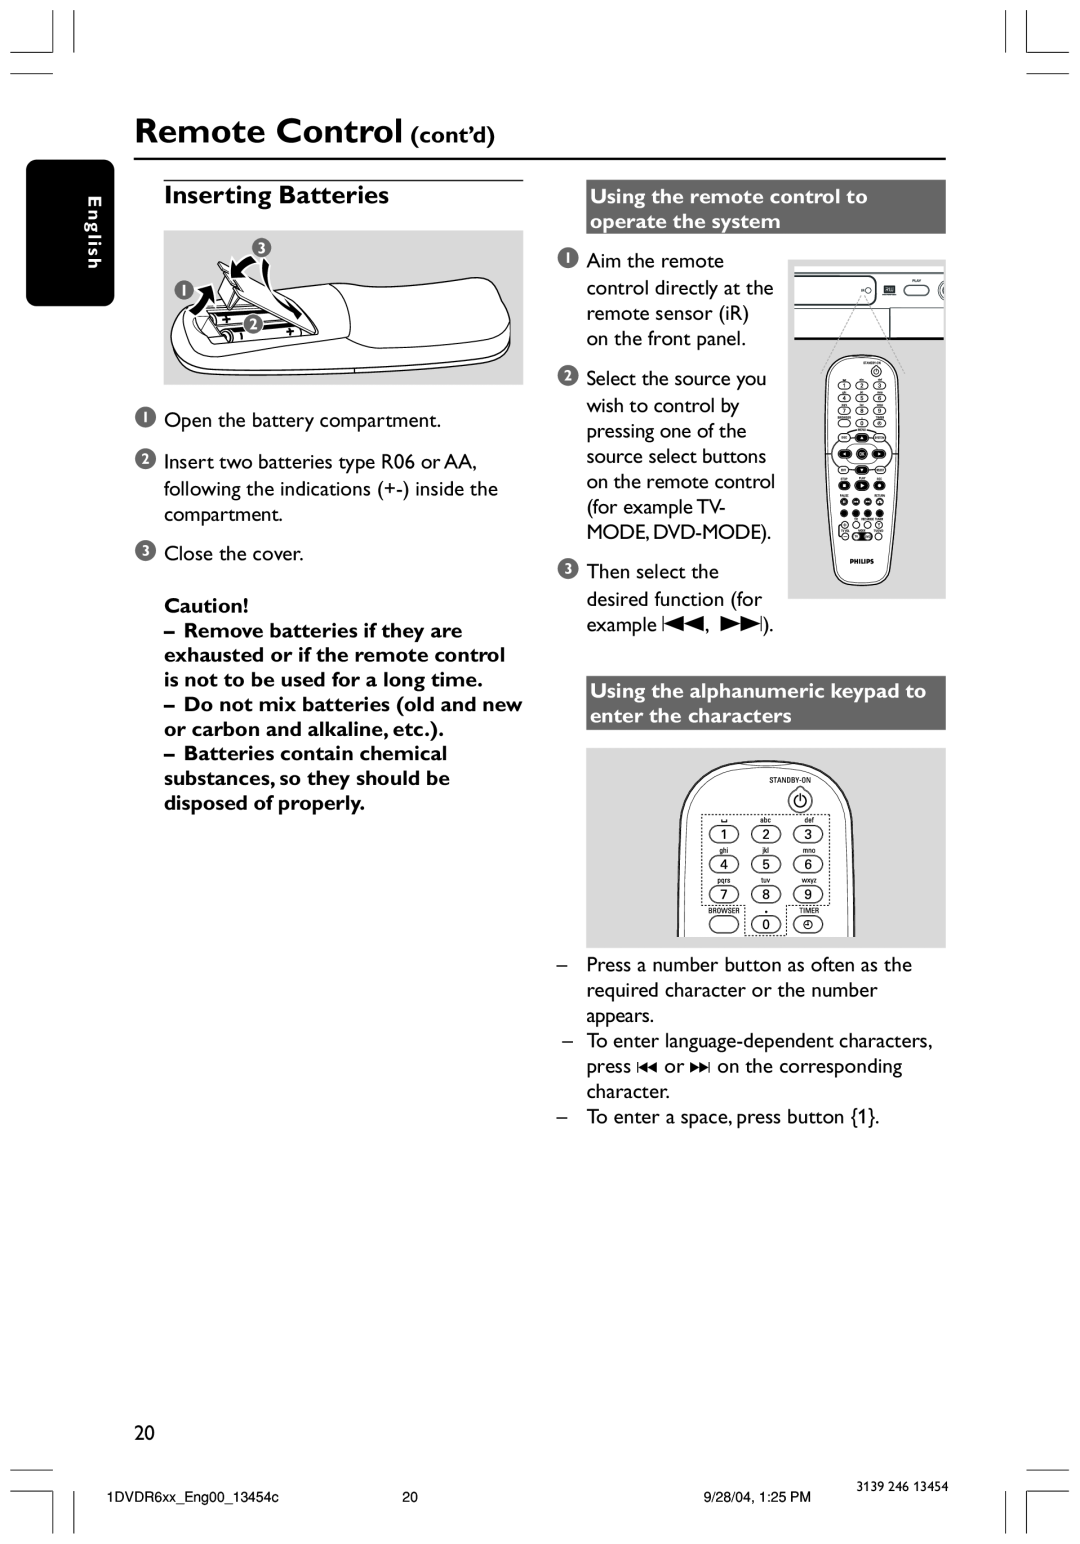 Philips DVDR612/97 user manual Remote Control cont’d, Inserting Batteries, Using the remote control to operate the system 